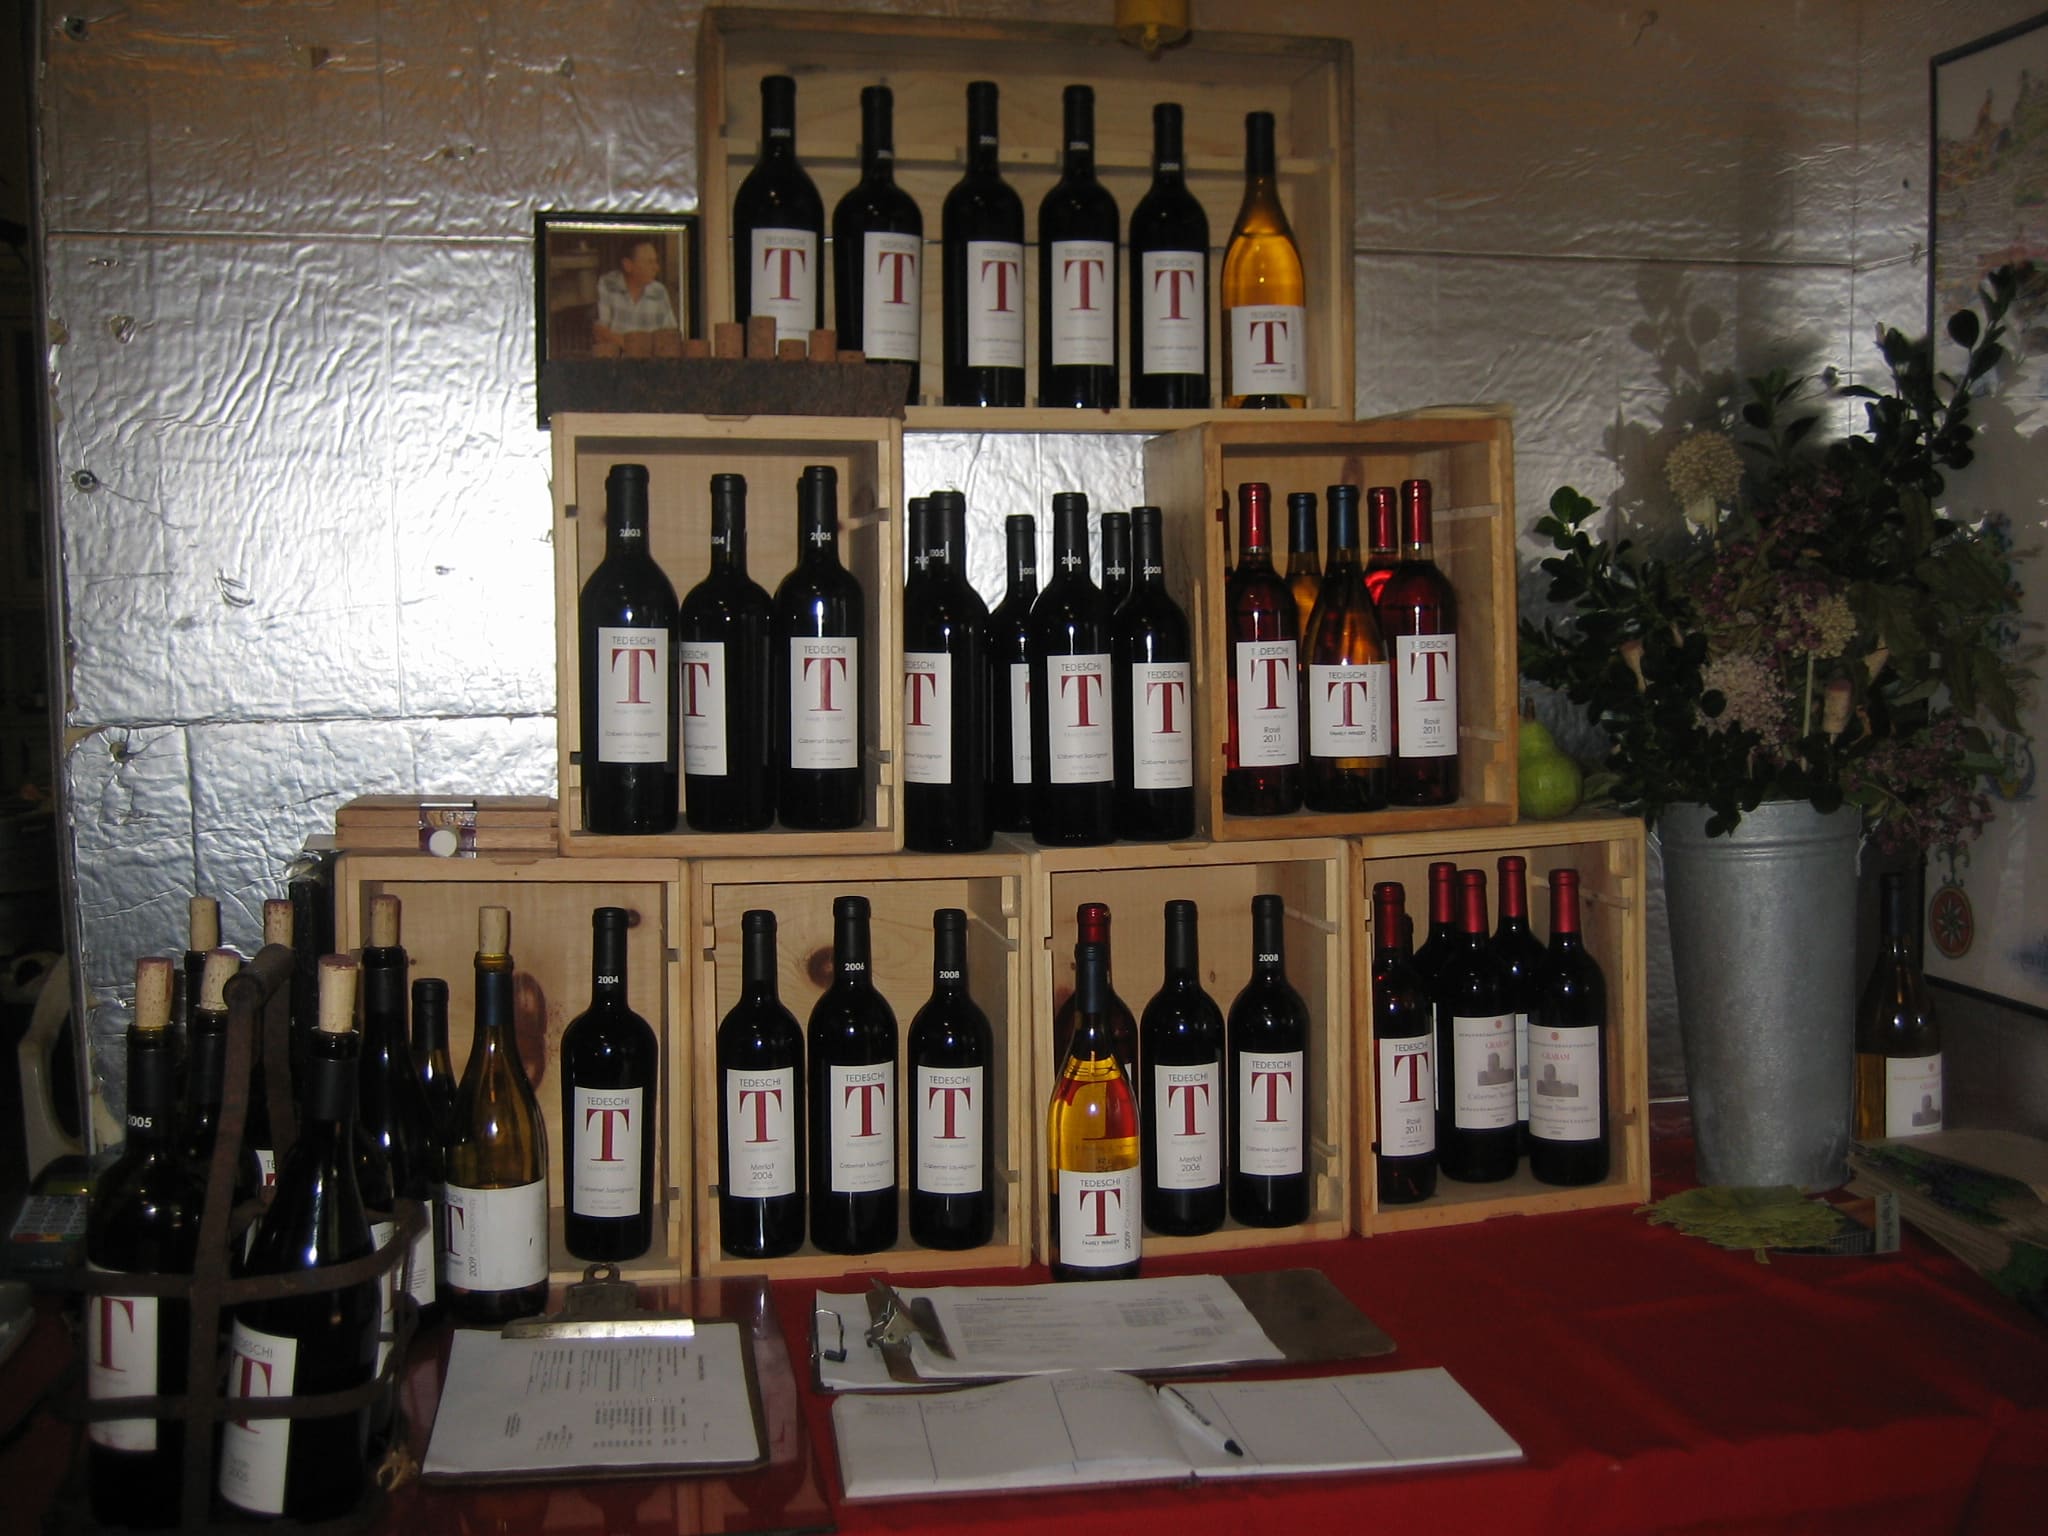 Some of the wonderful wine offerings made by Tedeschi